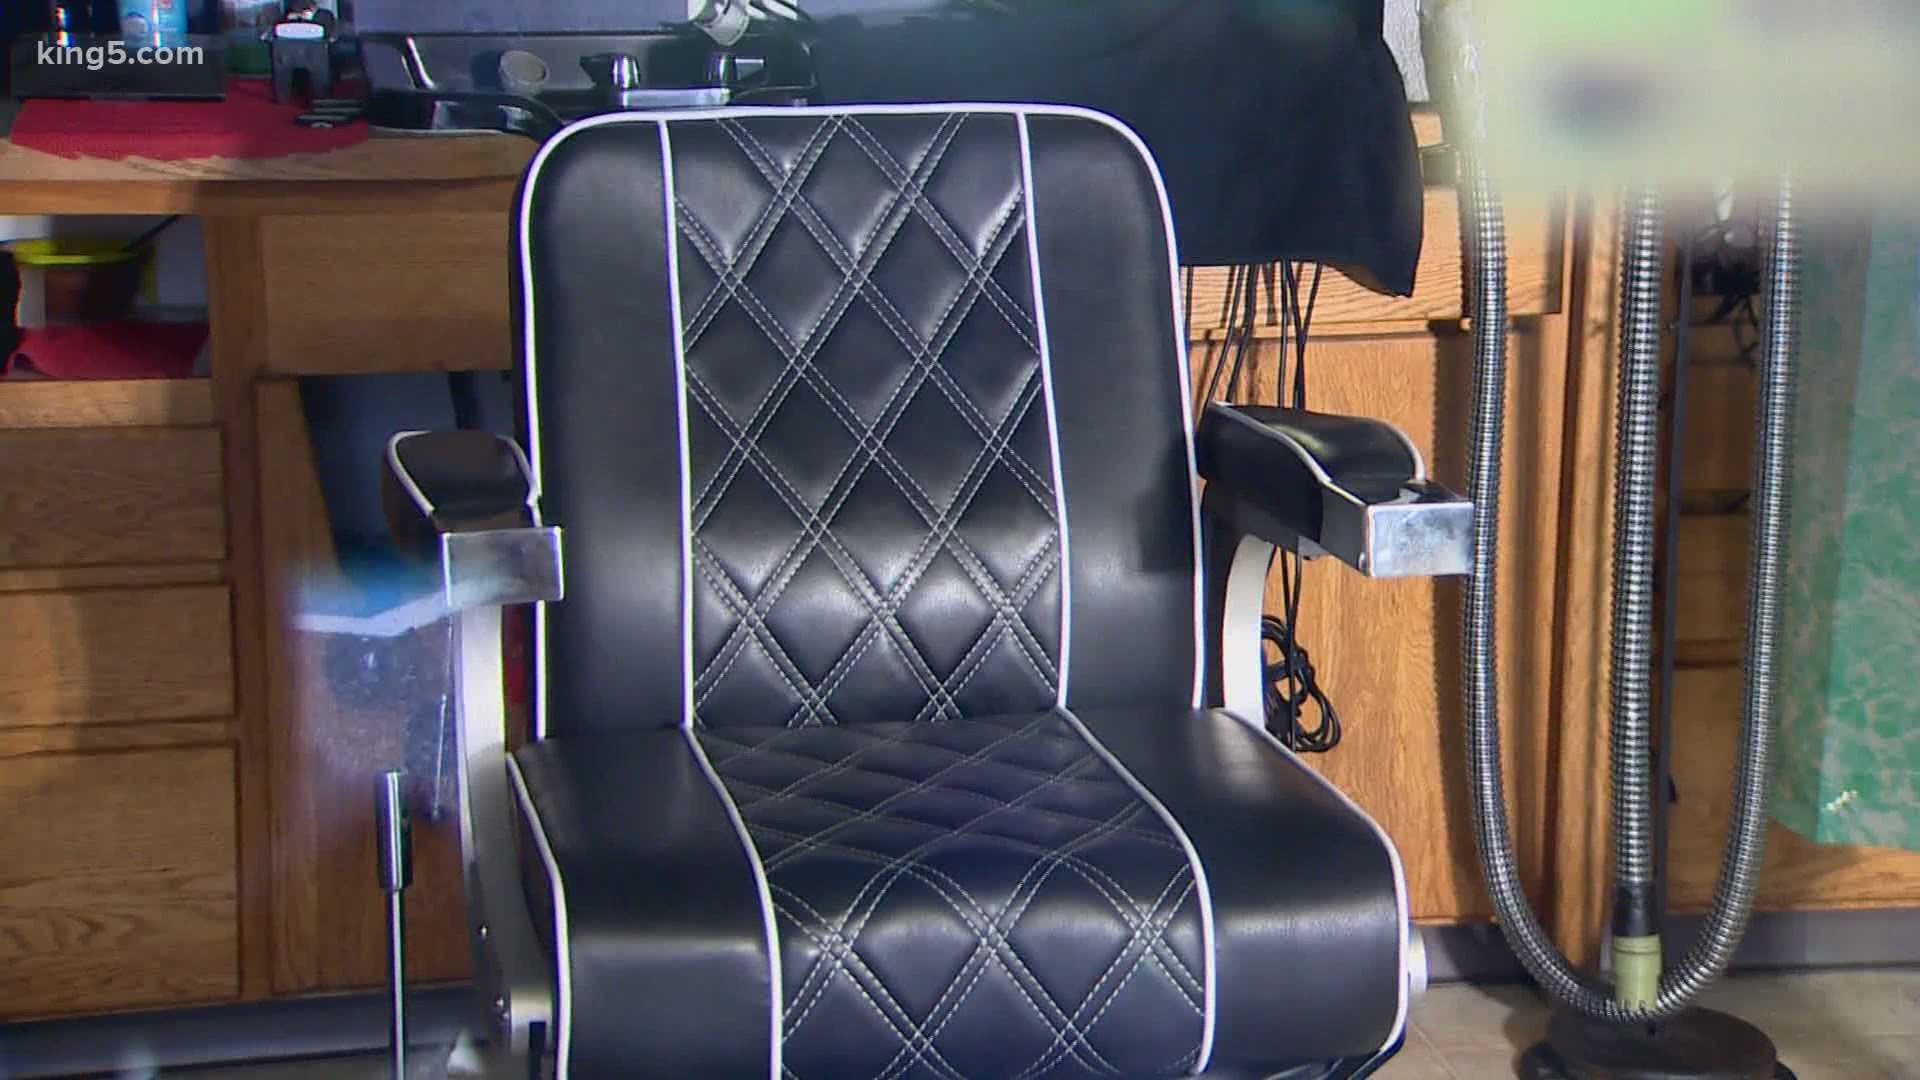 Three community activists hope to invite officers to barbershops, to be "around Black men in their comfort zone," but the idea drew criticism from the county NAACP.